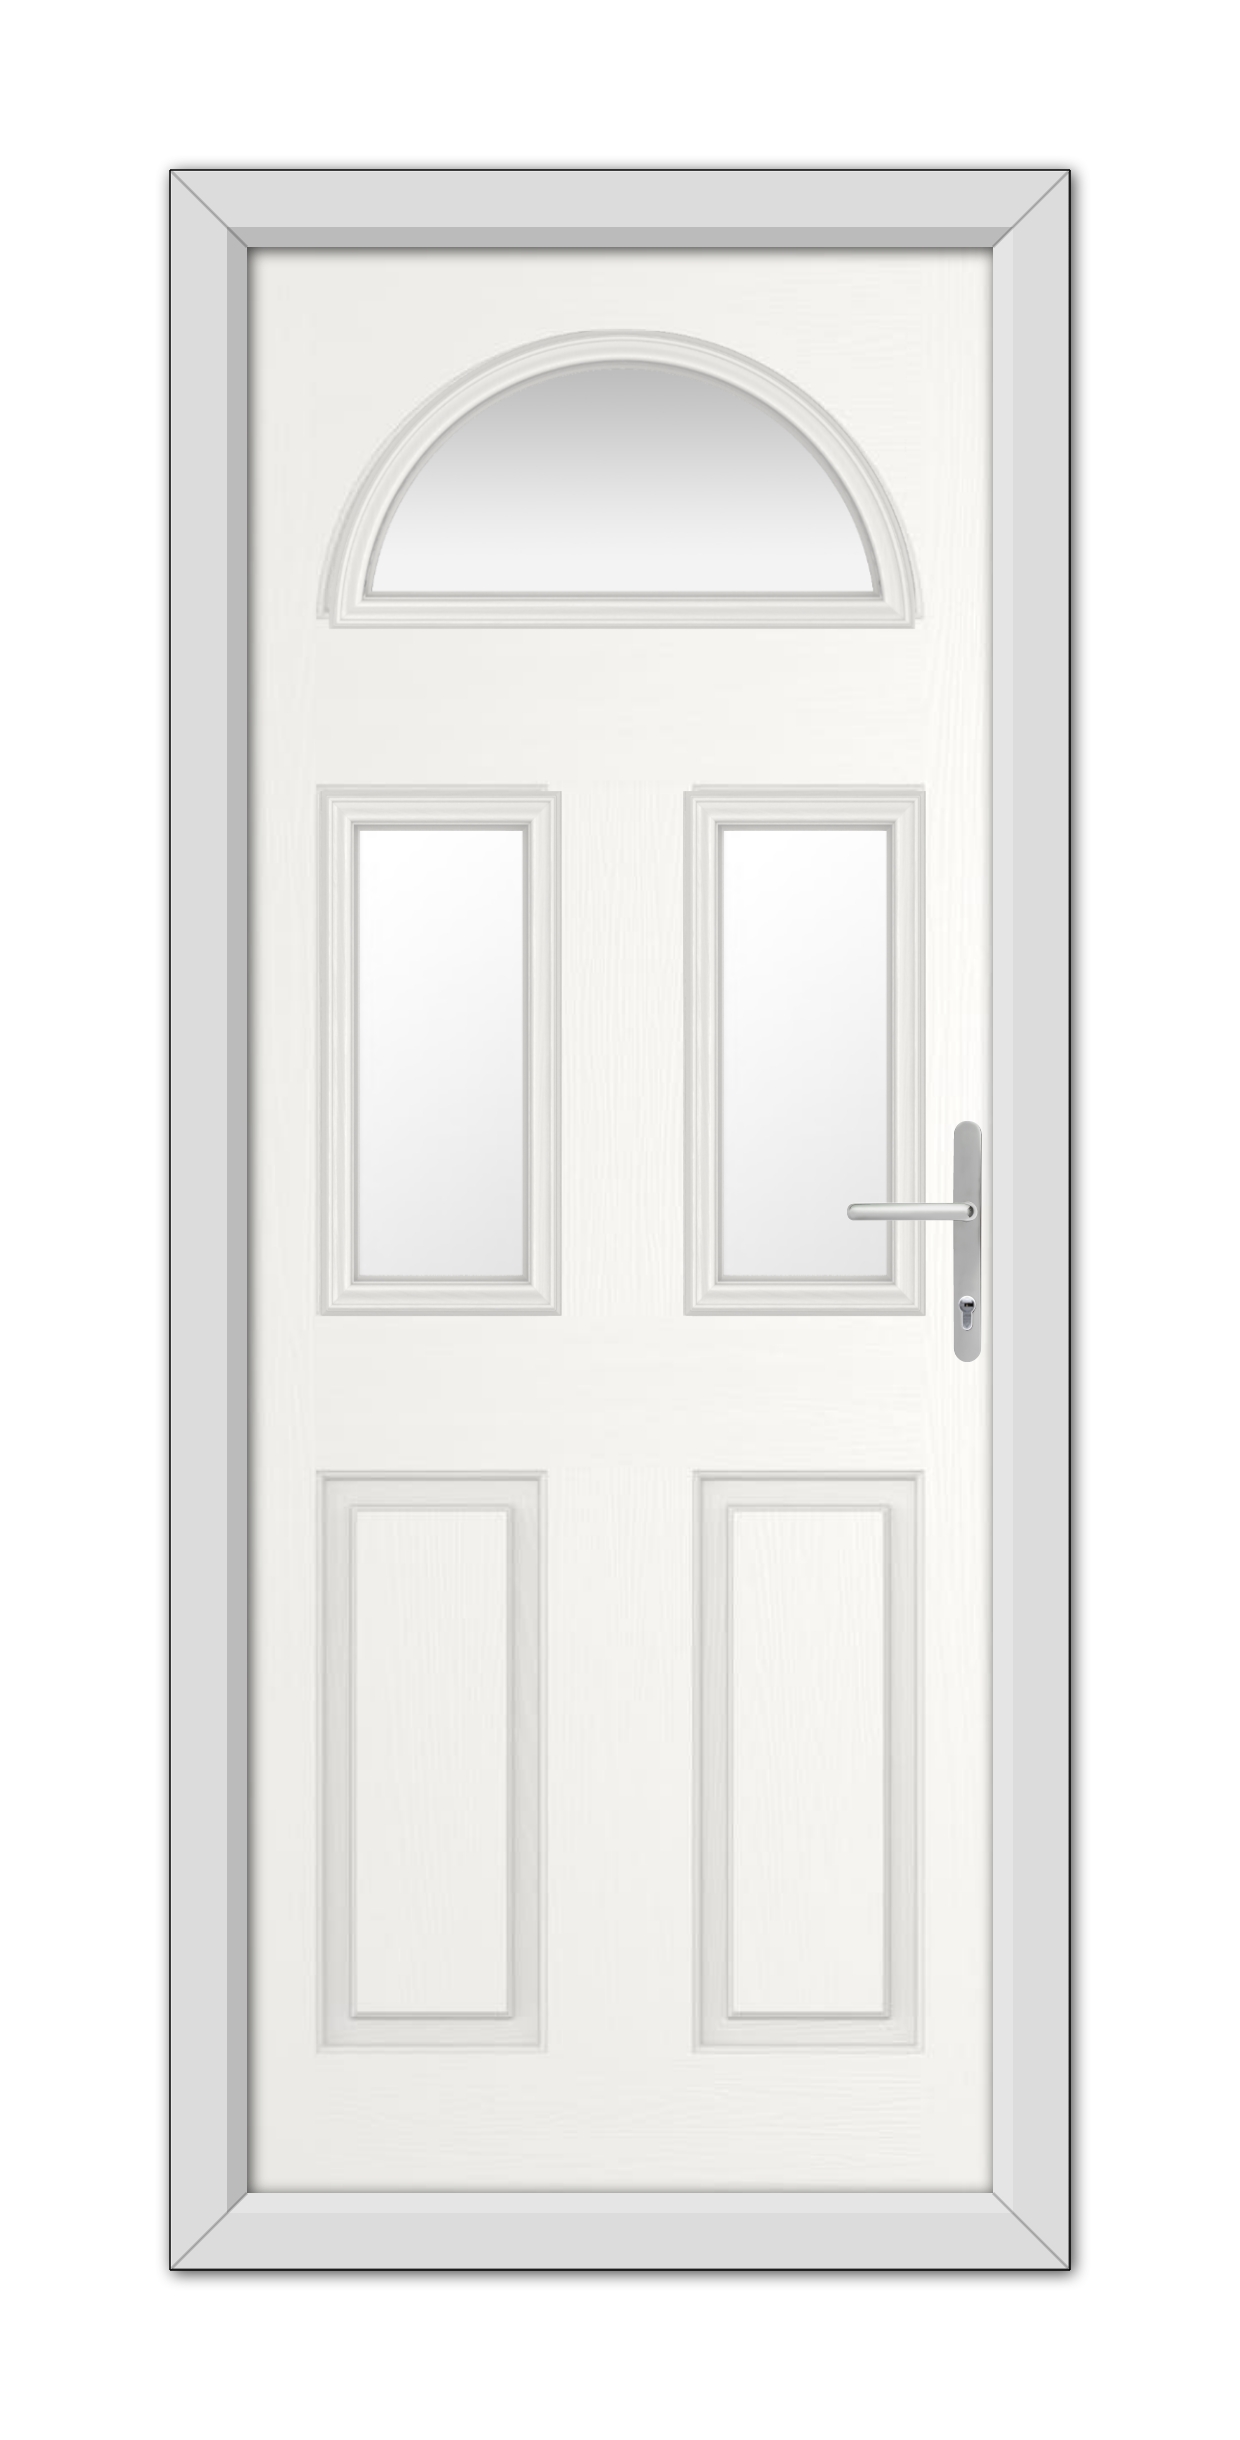 A White Winslow 3 Composite Door 48mm Timber Core with an arched window at the top and a modern handle, set within a simple frame.